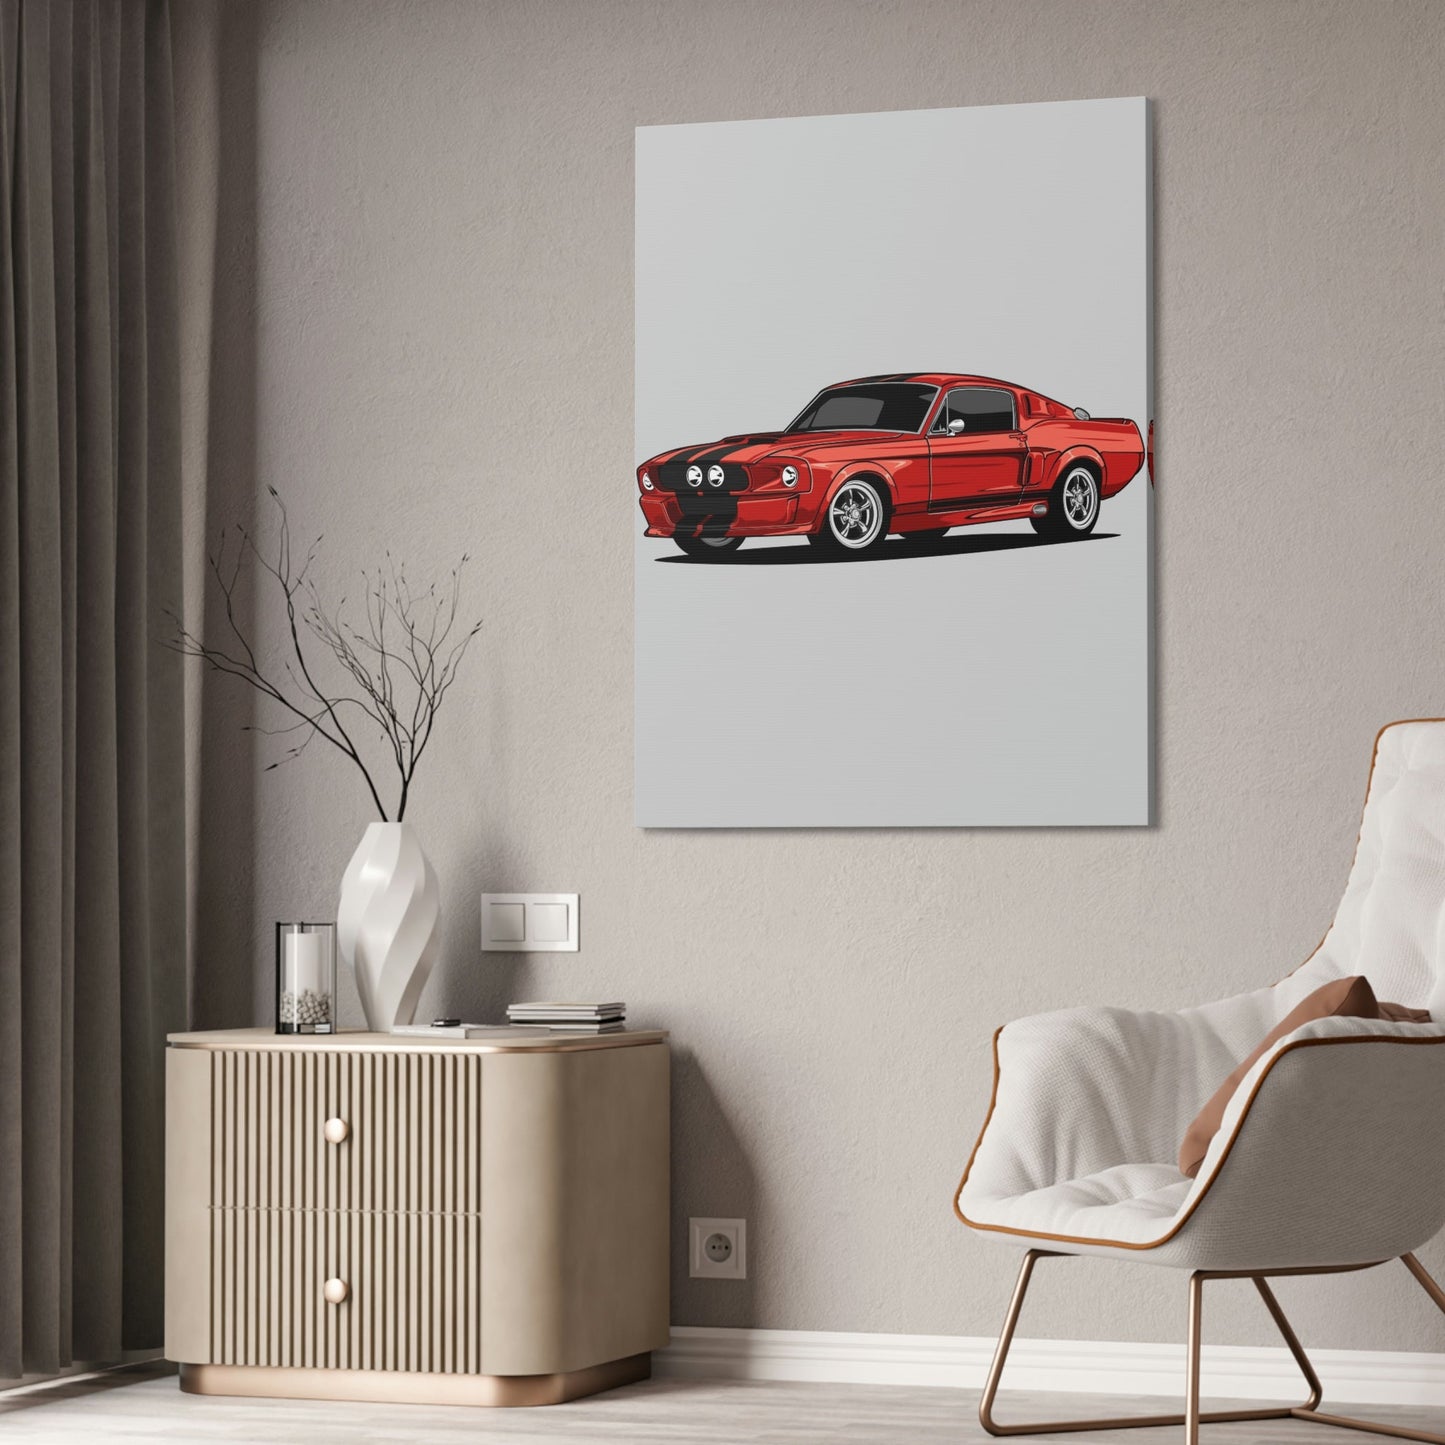 Racing Aesthetics: Canvas & Poster of a Mustang Sports Car for Wall Decor